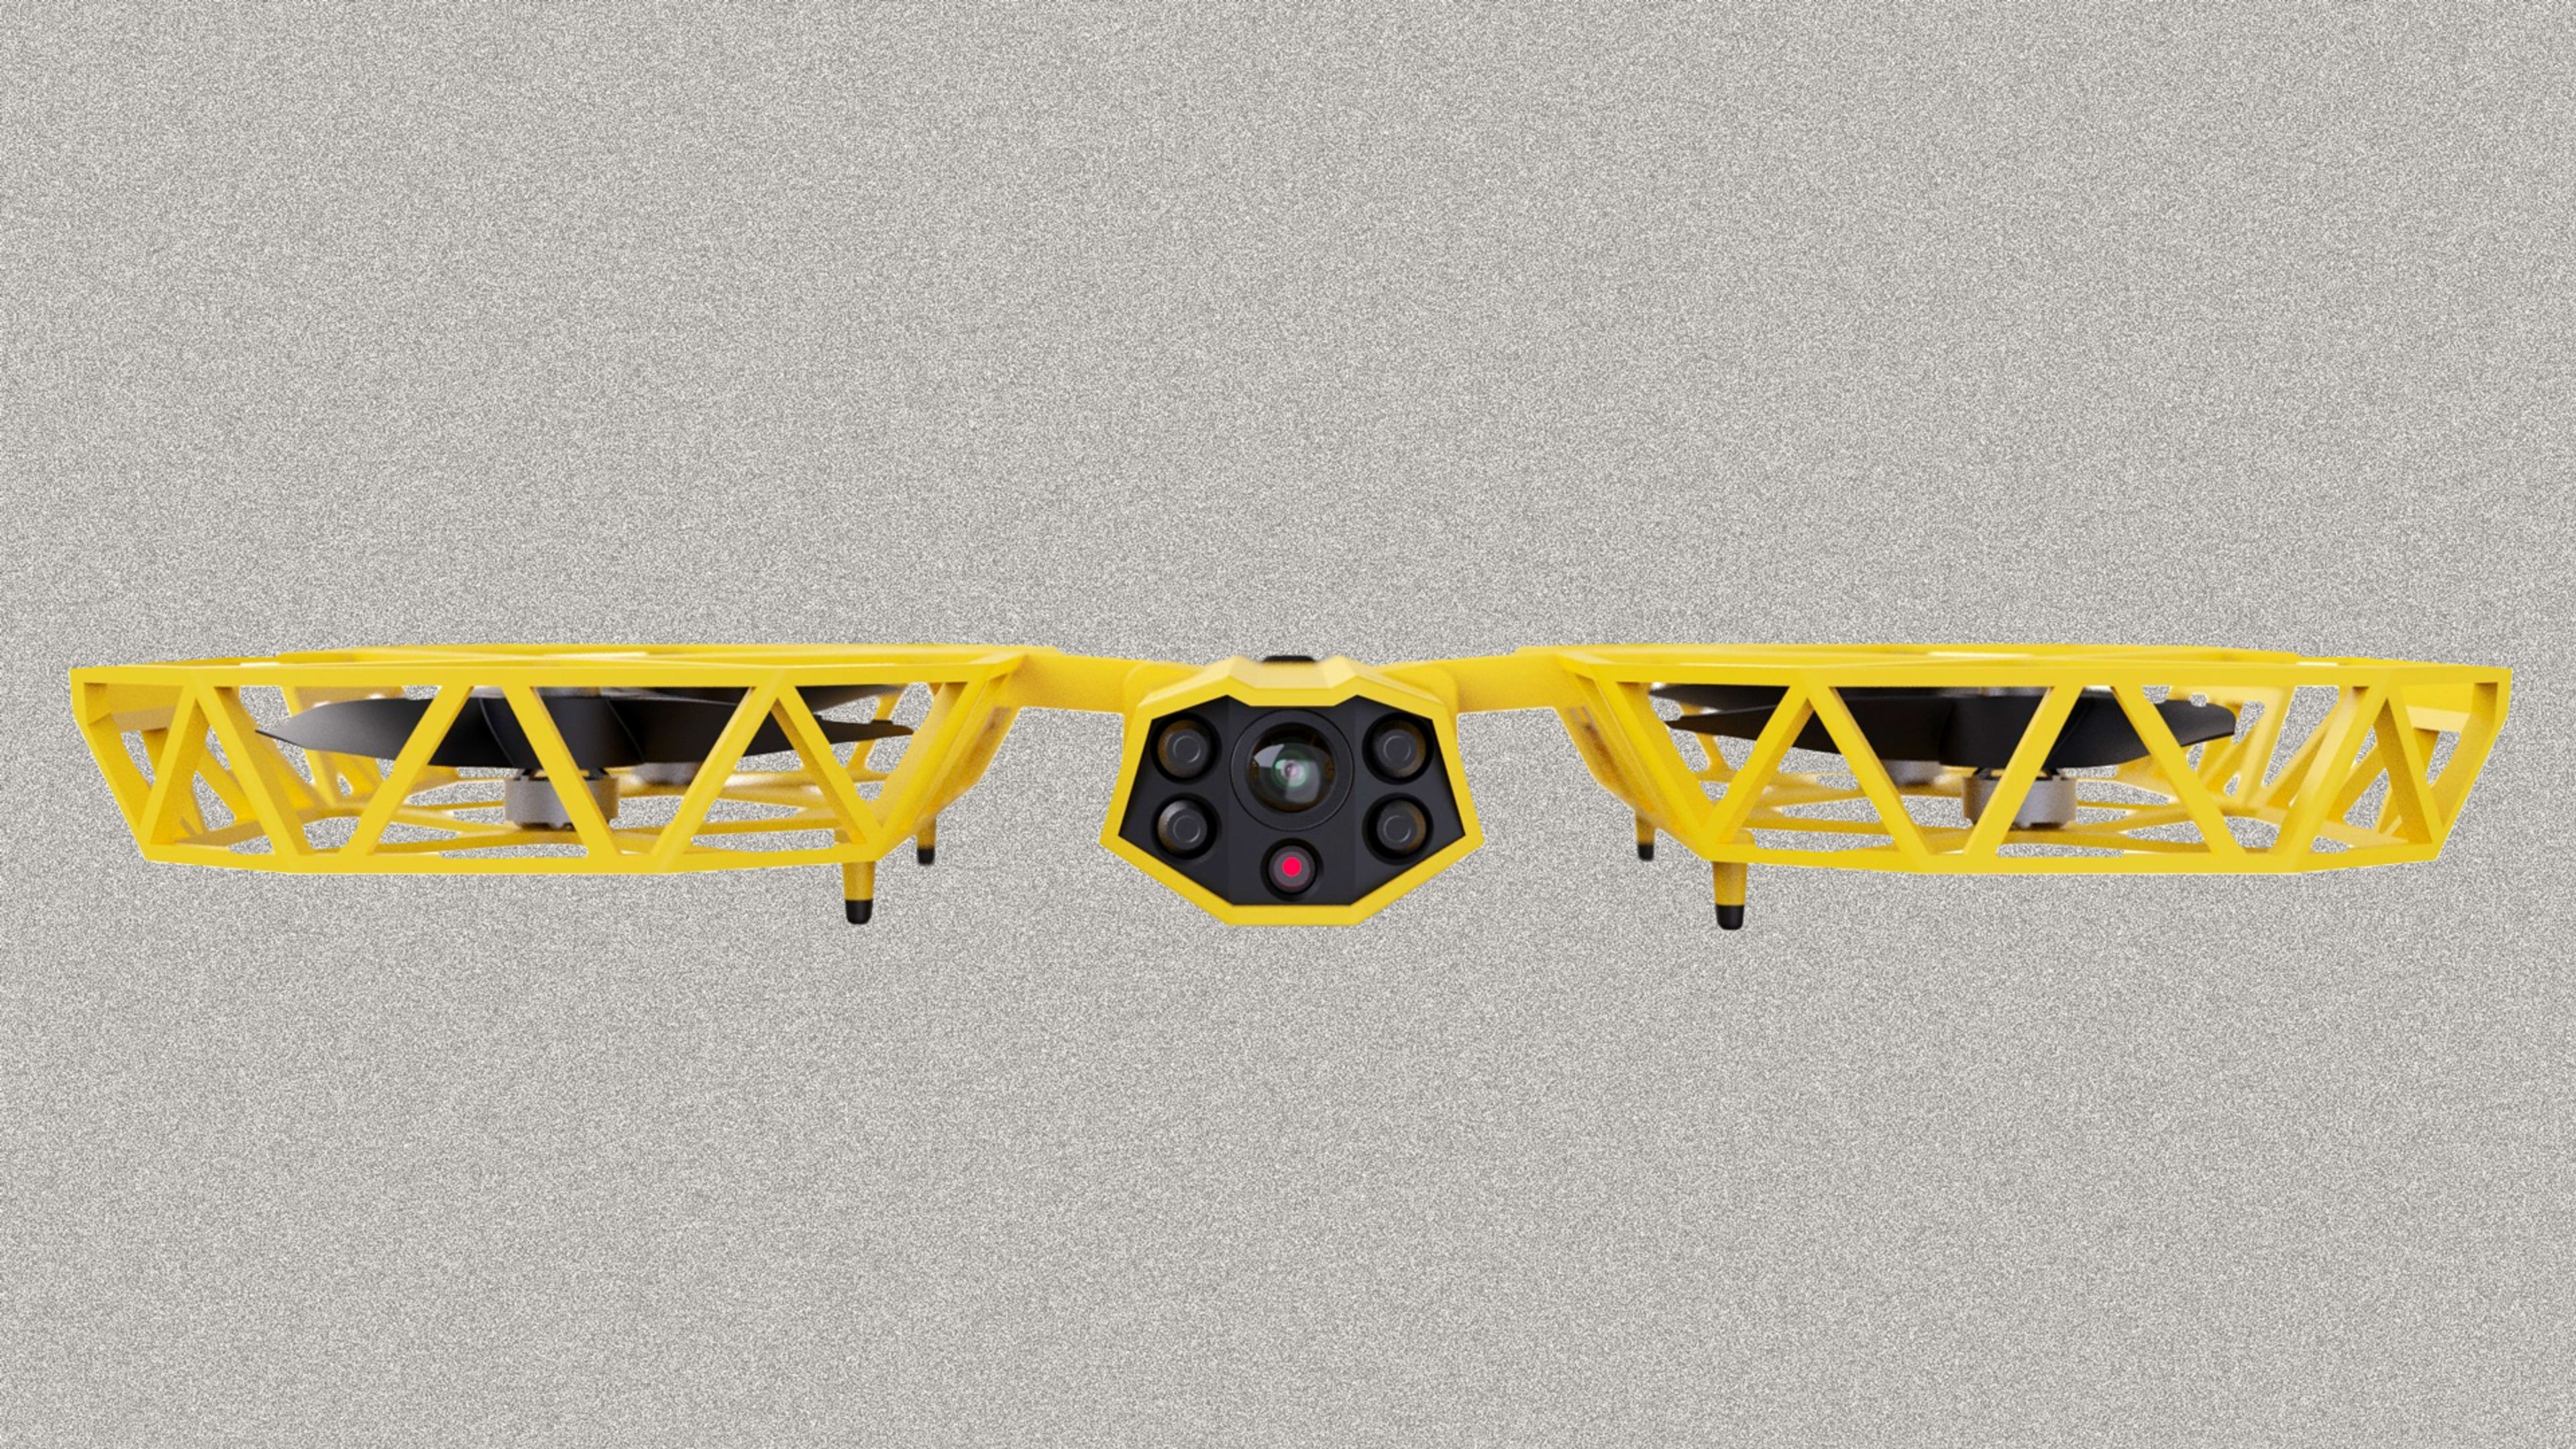 The Taser drone may be a creepy fantasy, but the questions it raises are real